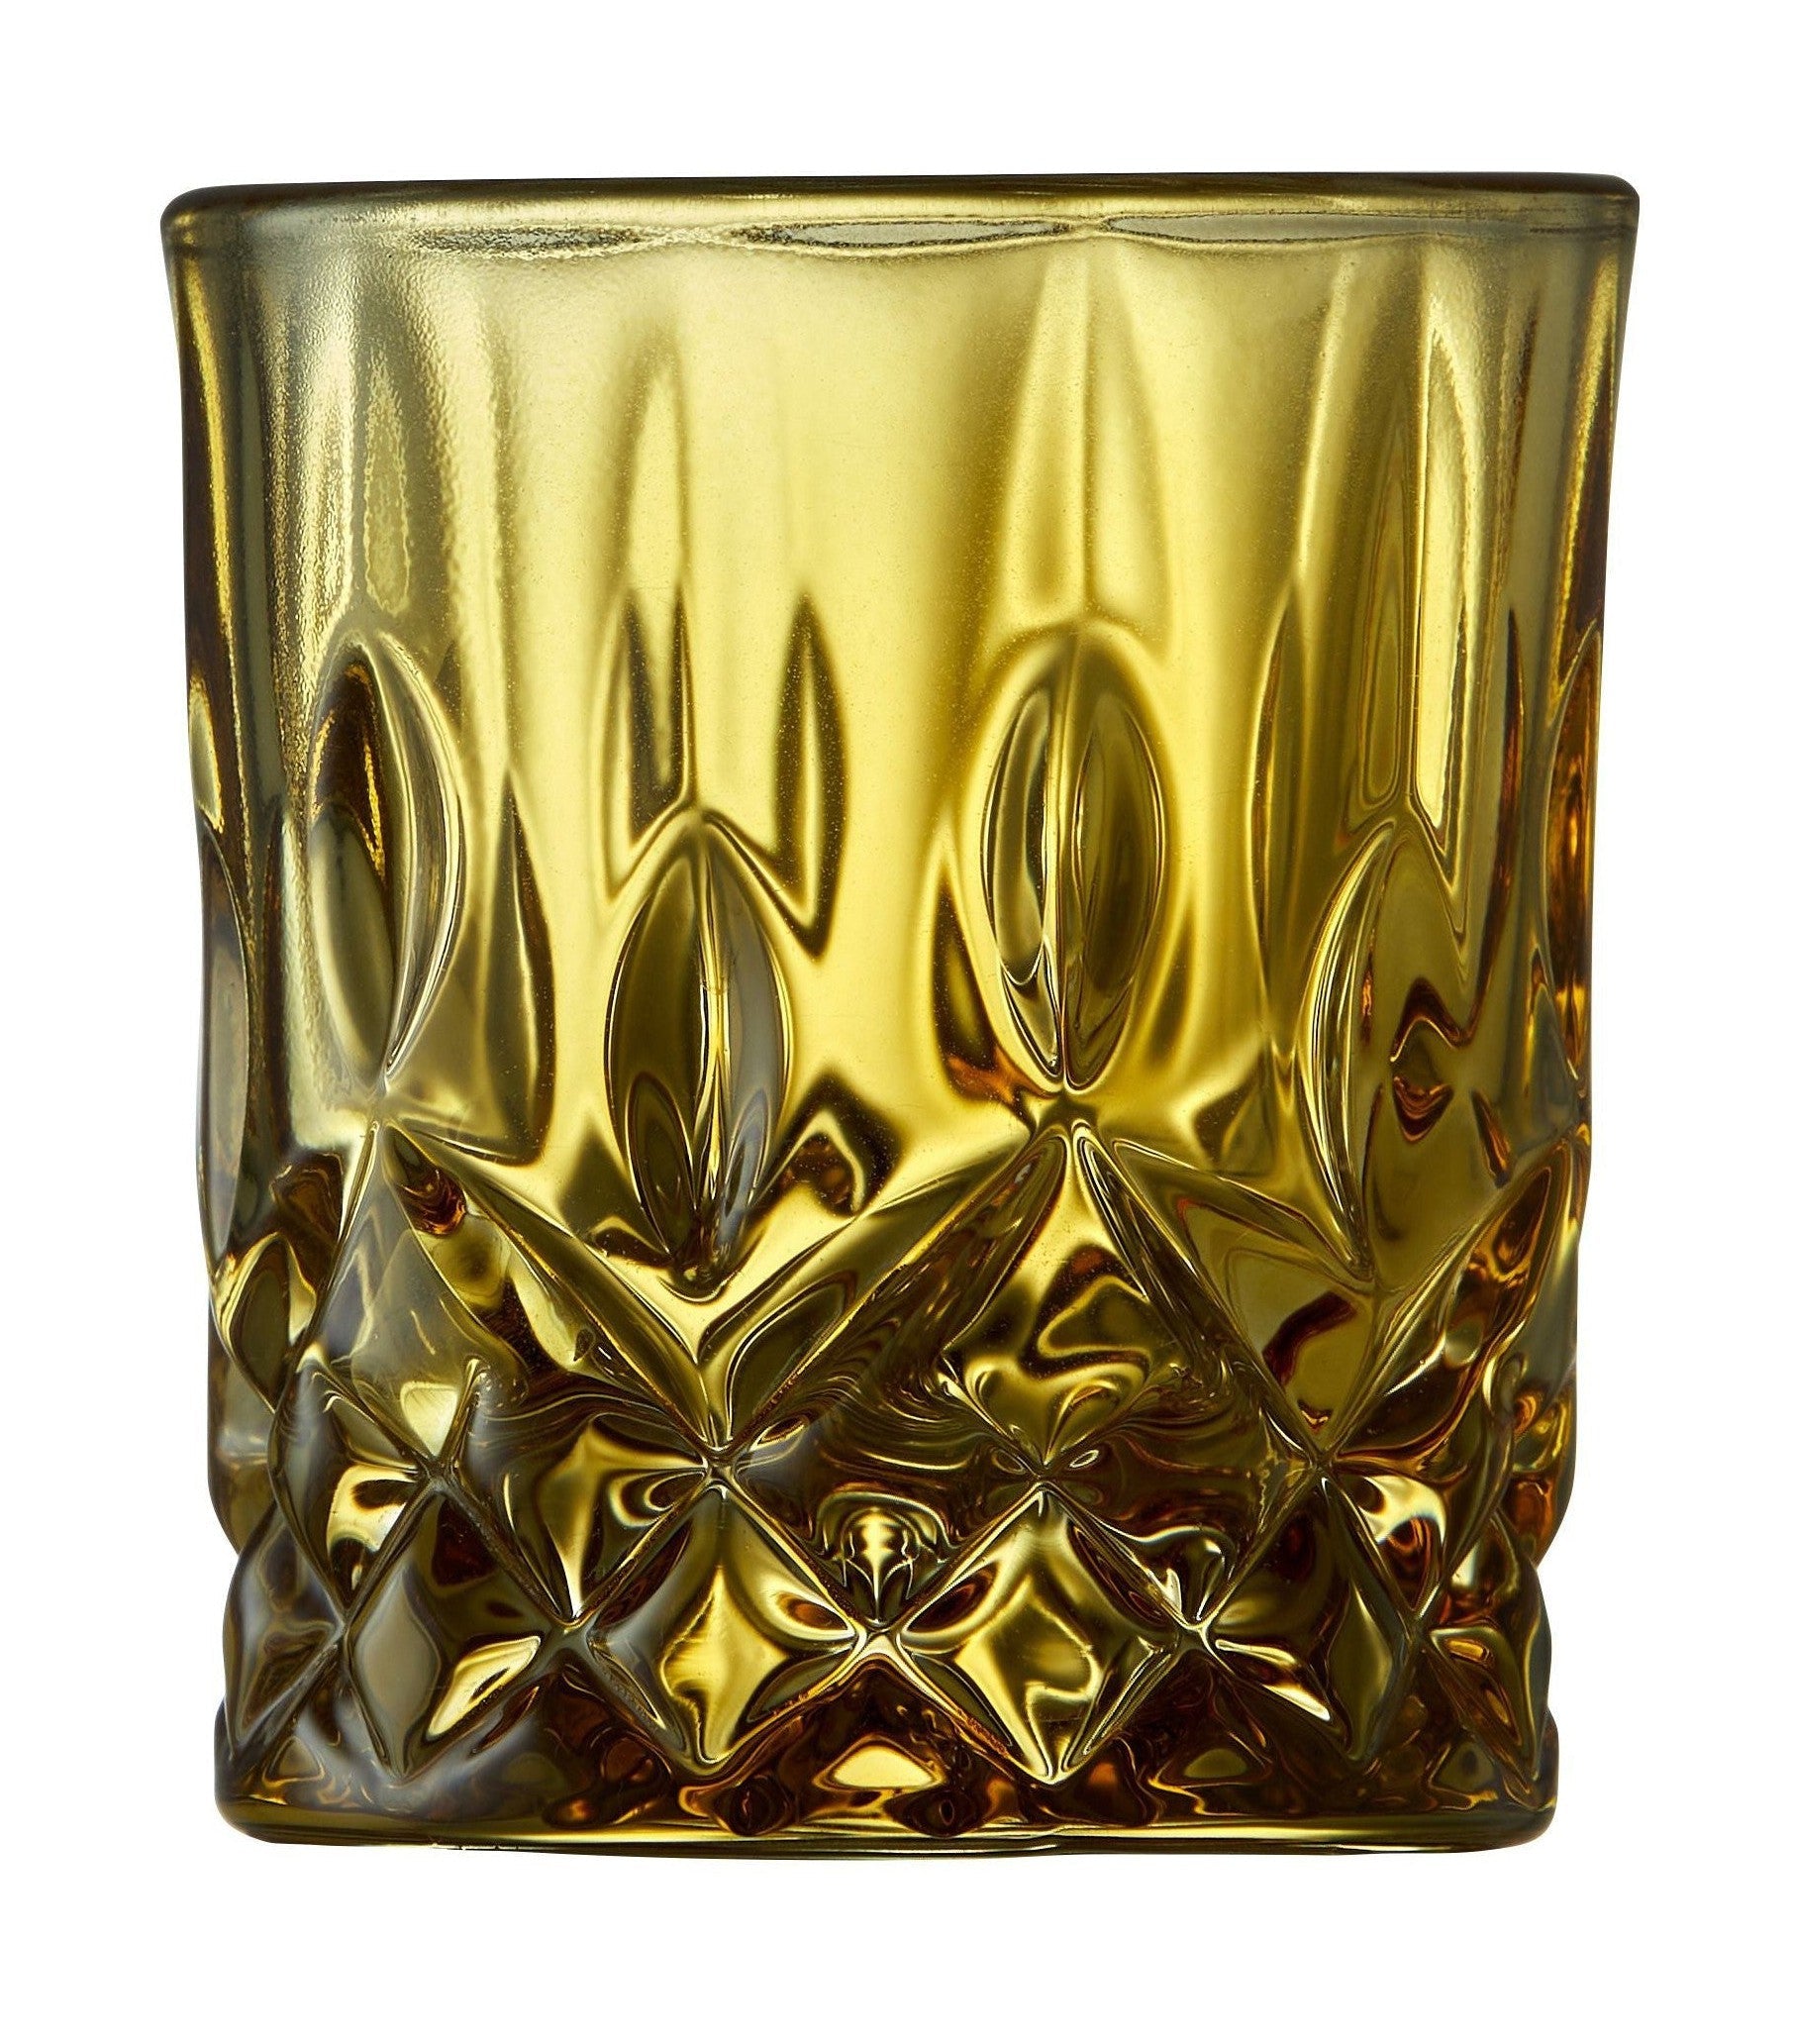 Lyngby Glas Sorrento Show Glass 4 Cl 4 PCS., Amber